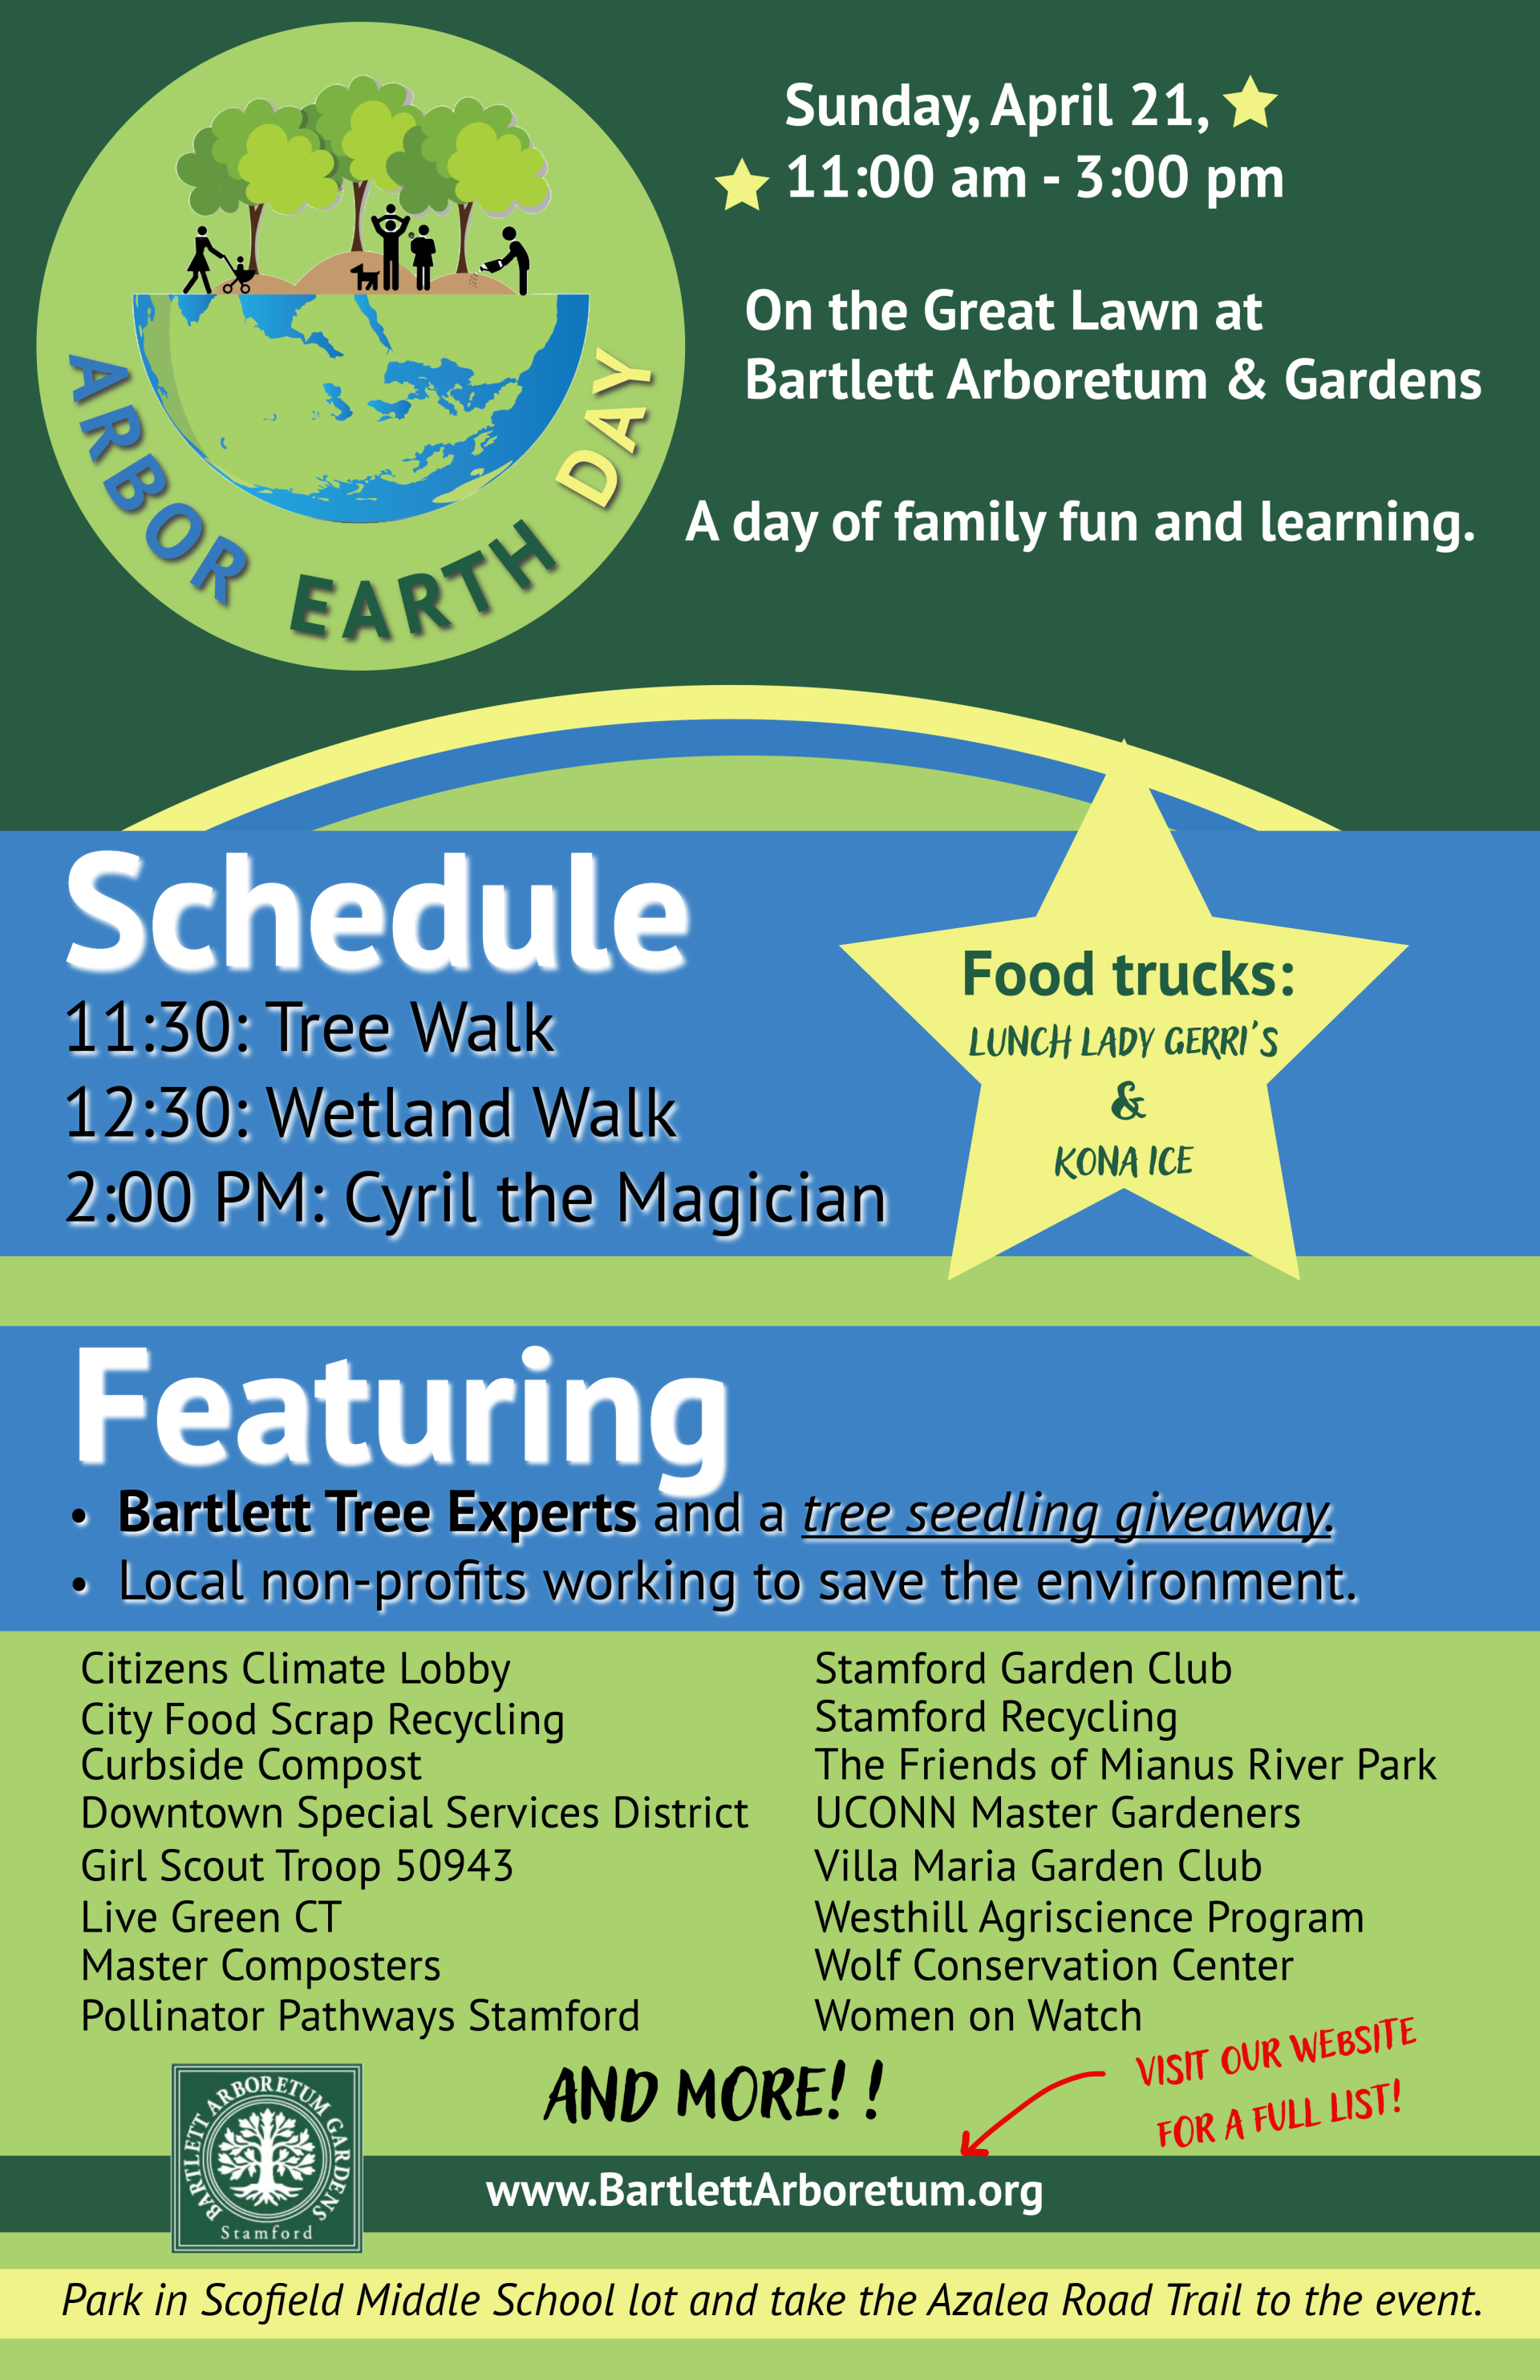 A flyer for the Earth Day Event Bartlett, with the schedule, 11:30am tree walk, 12:30 wetland walk, and magician at 2:00 on Sunday 4/21